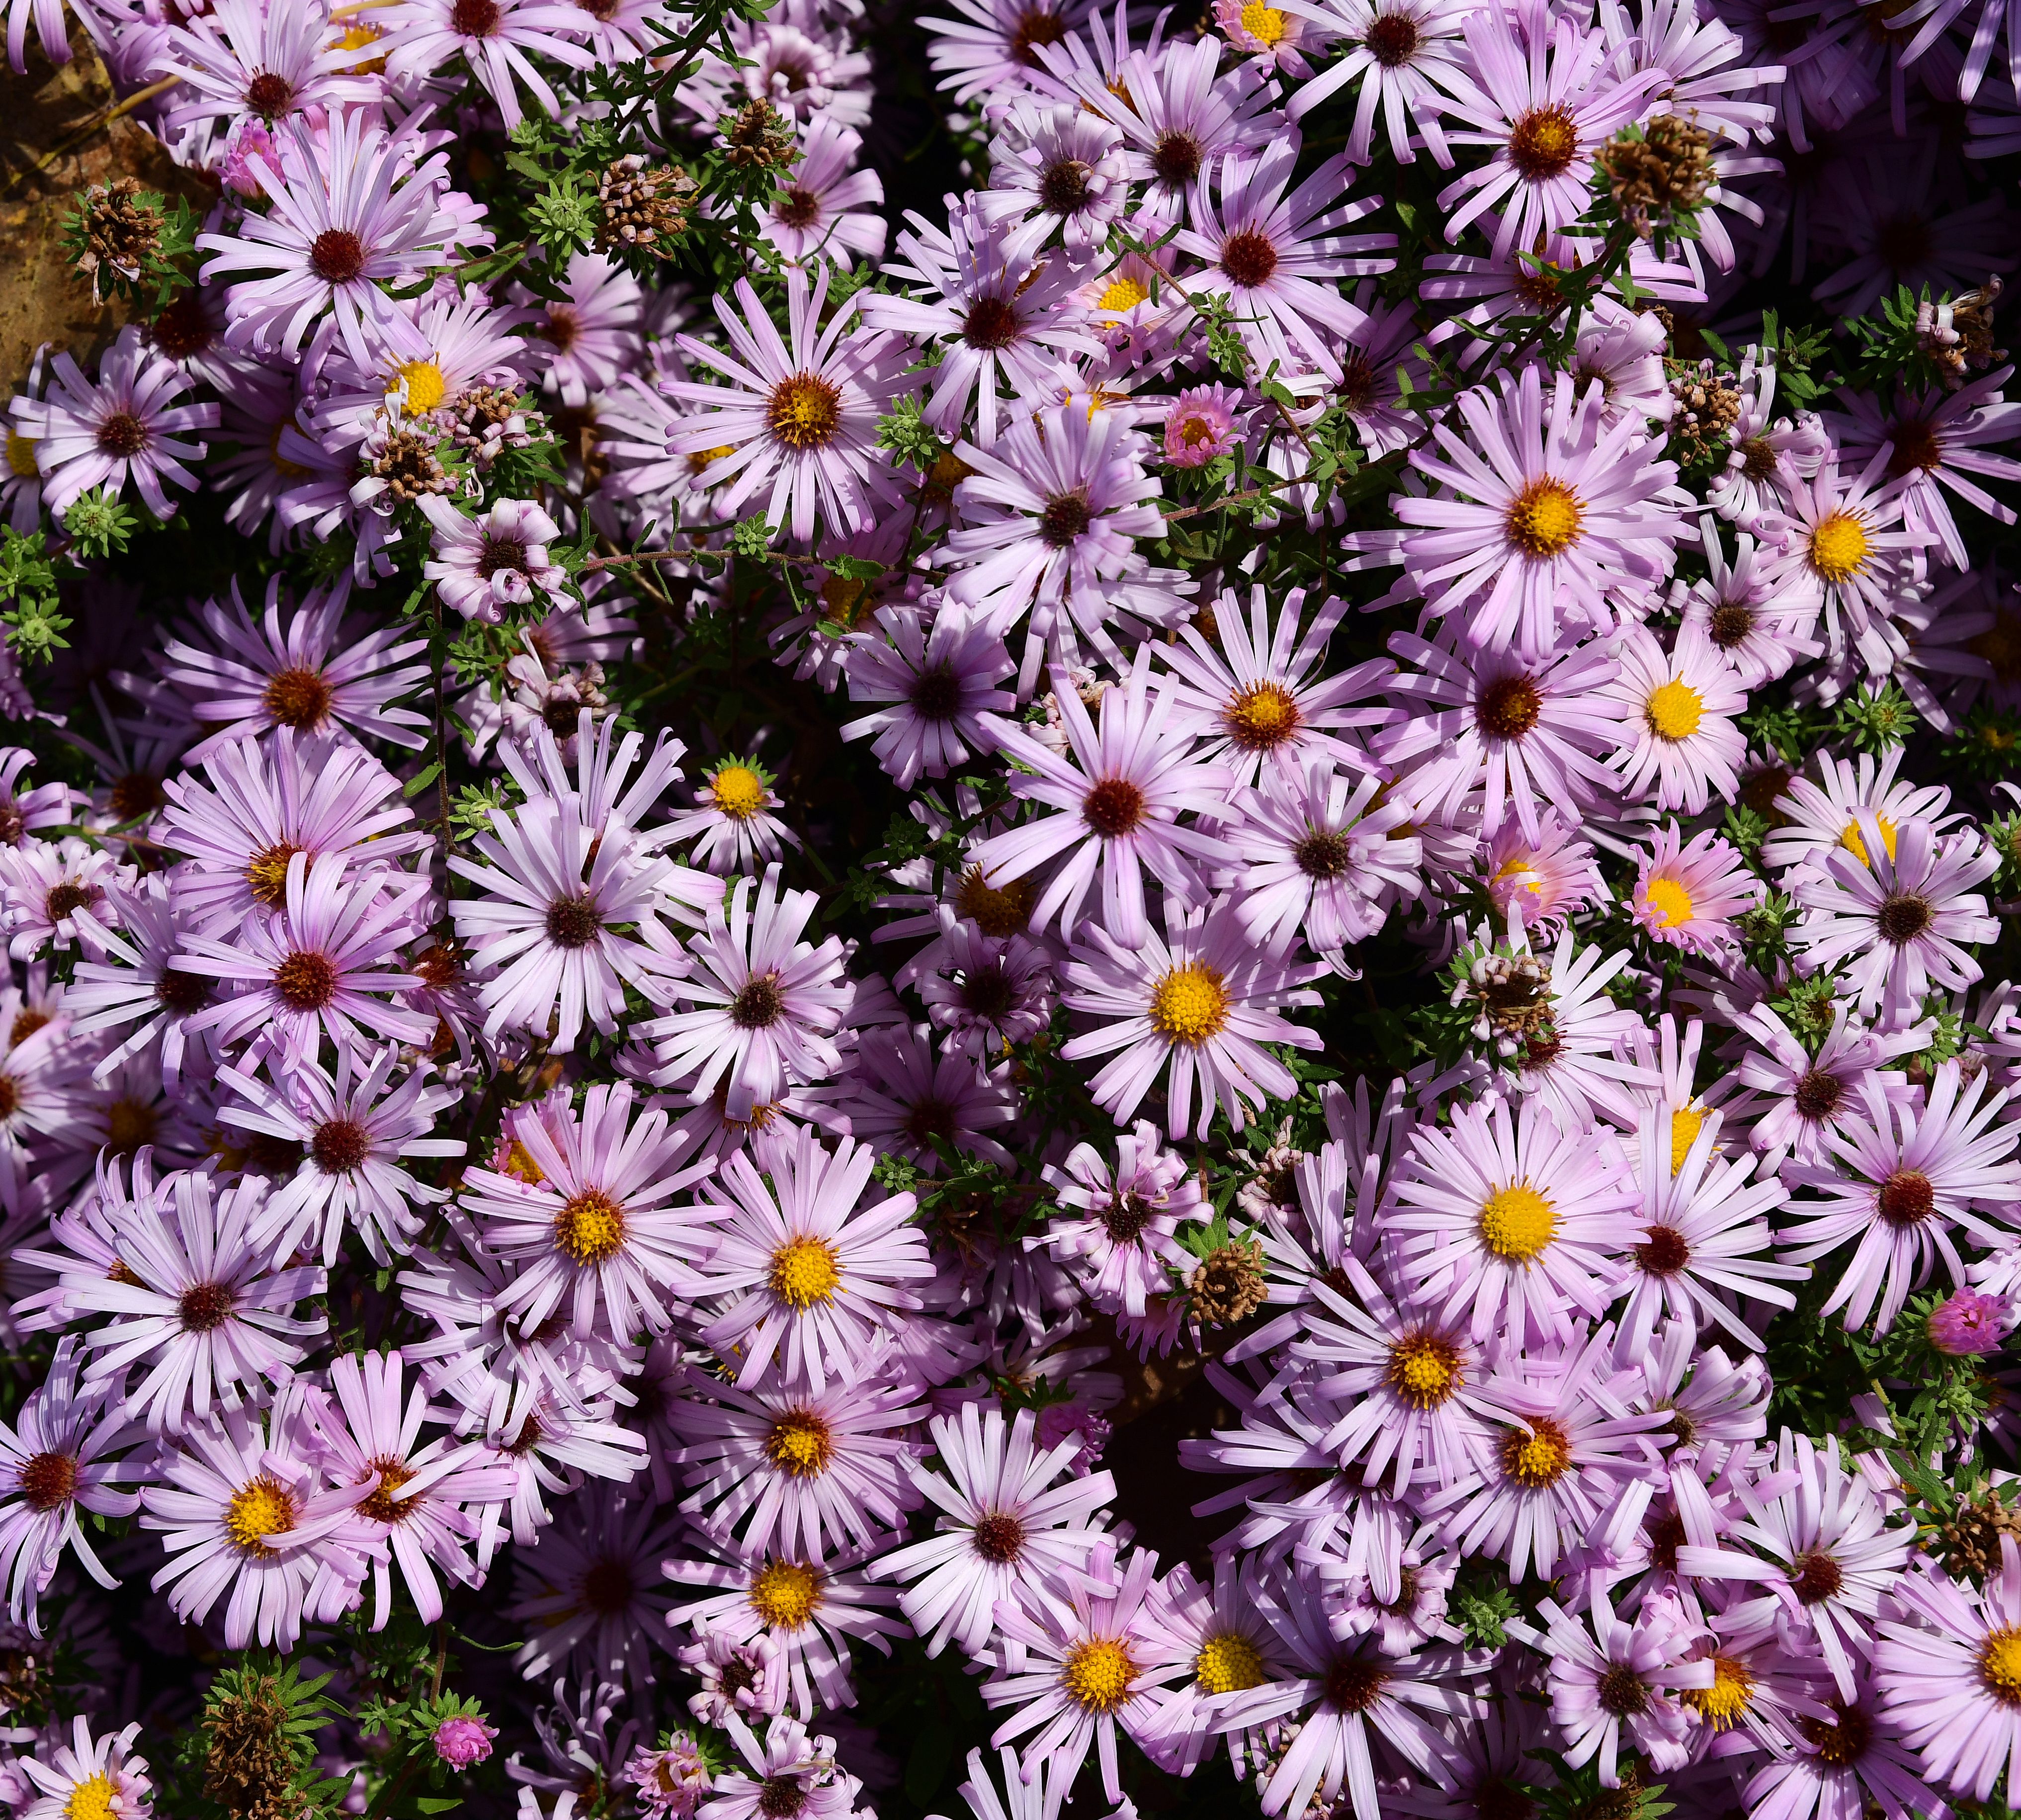 images/plants/aster/ast-cotton-candy/ast-cotton-candy-0006.jpg